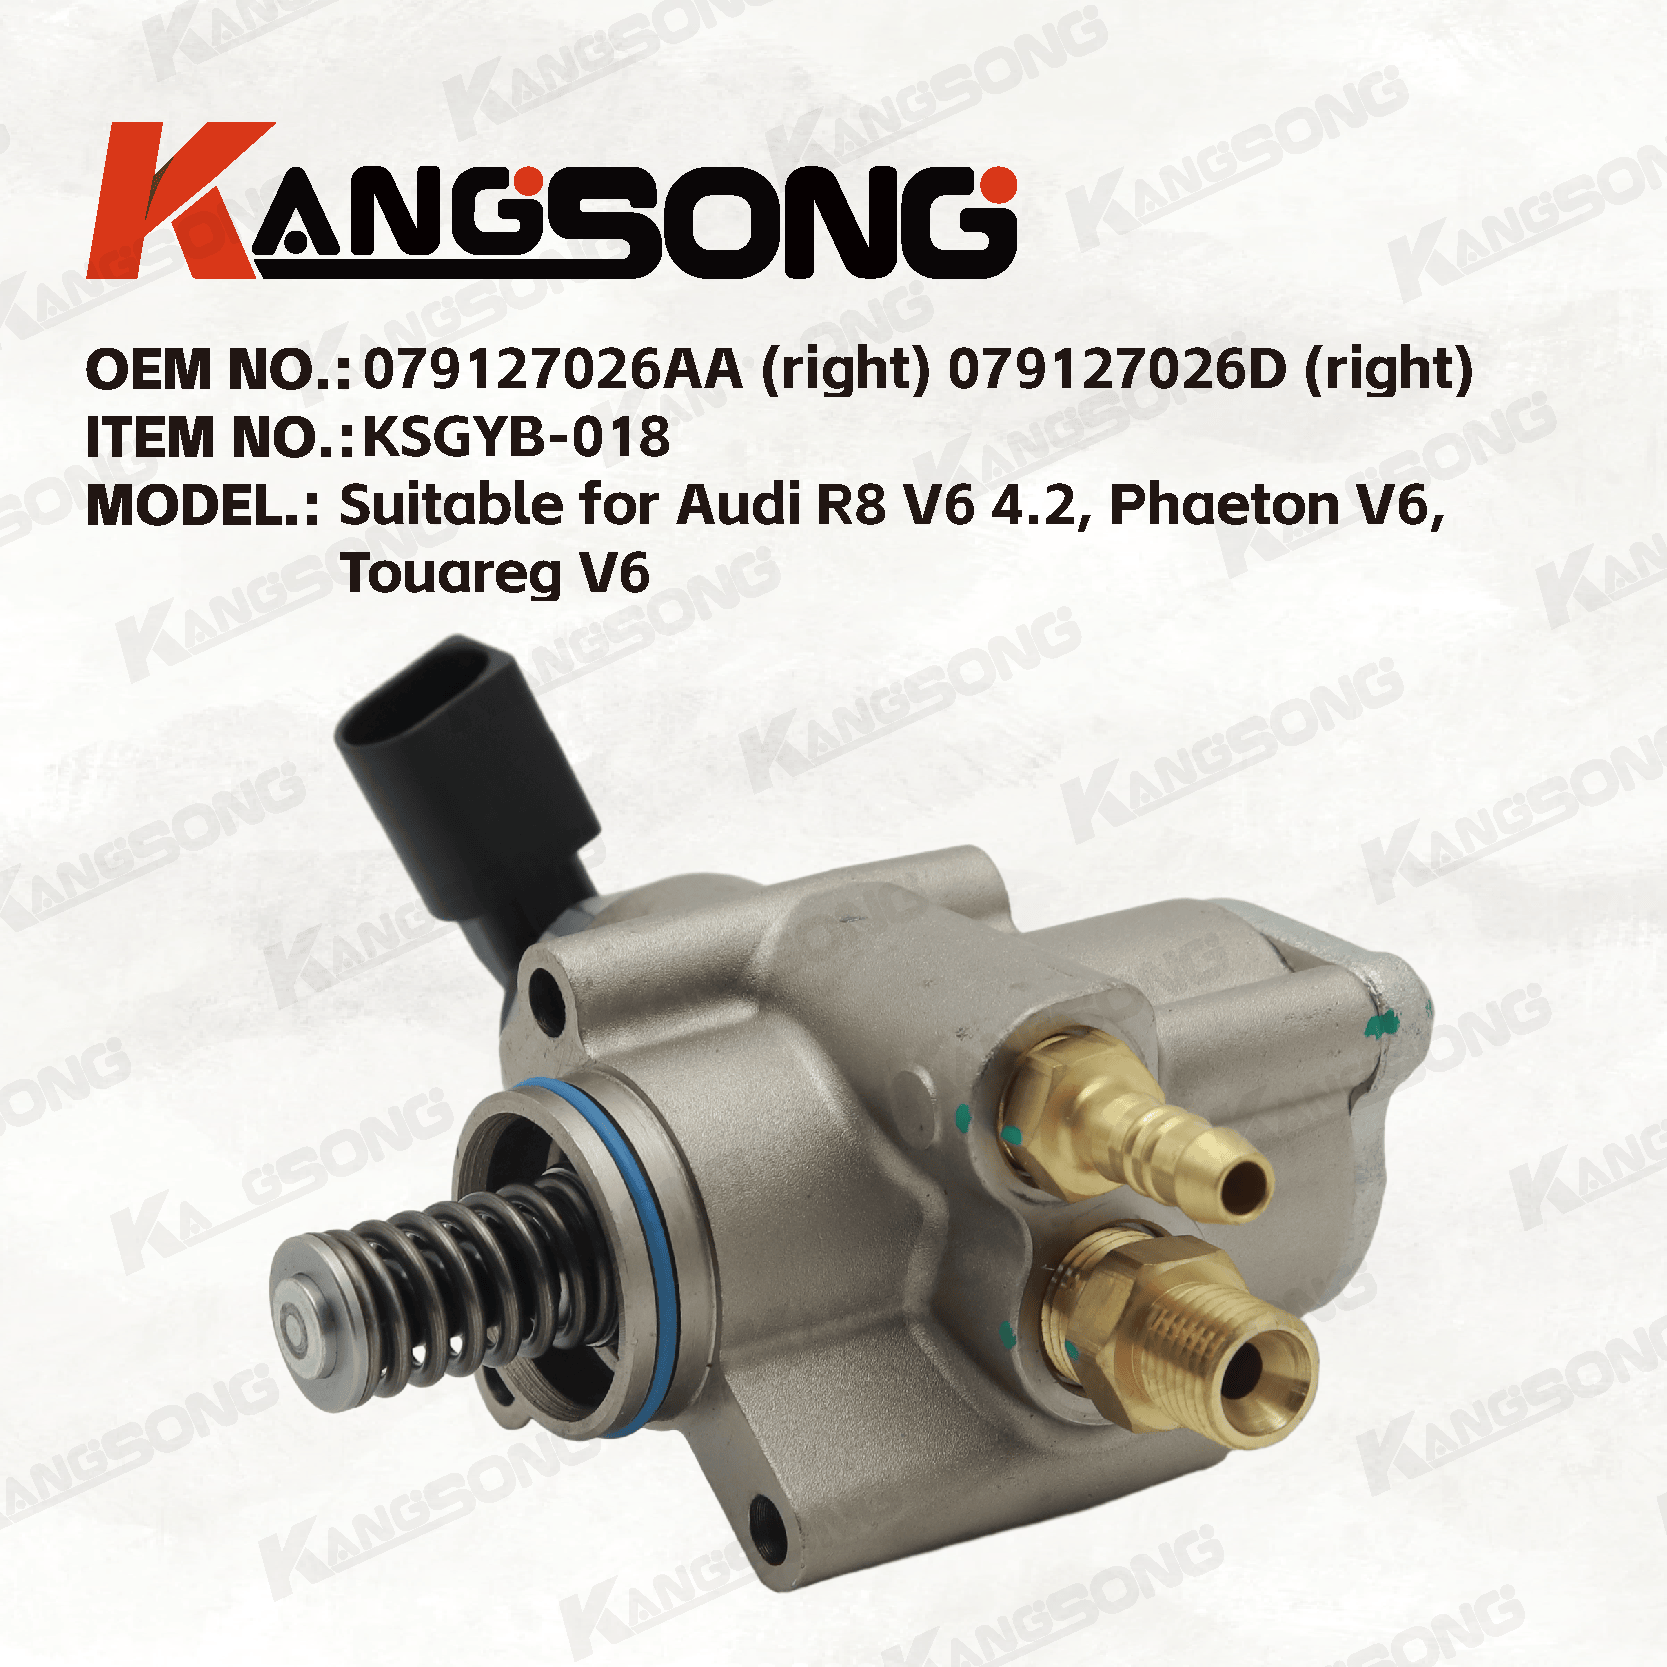 Applicable to Audi, Phaeton, Touareg/079127026AA (right) 079127026D (right) 079127026H (right)/High pressure fuel pump/KSGYB-018